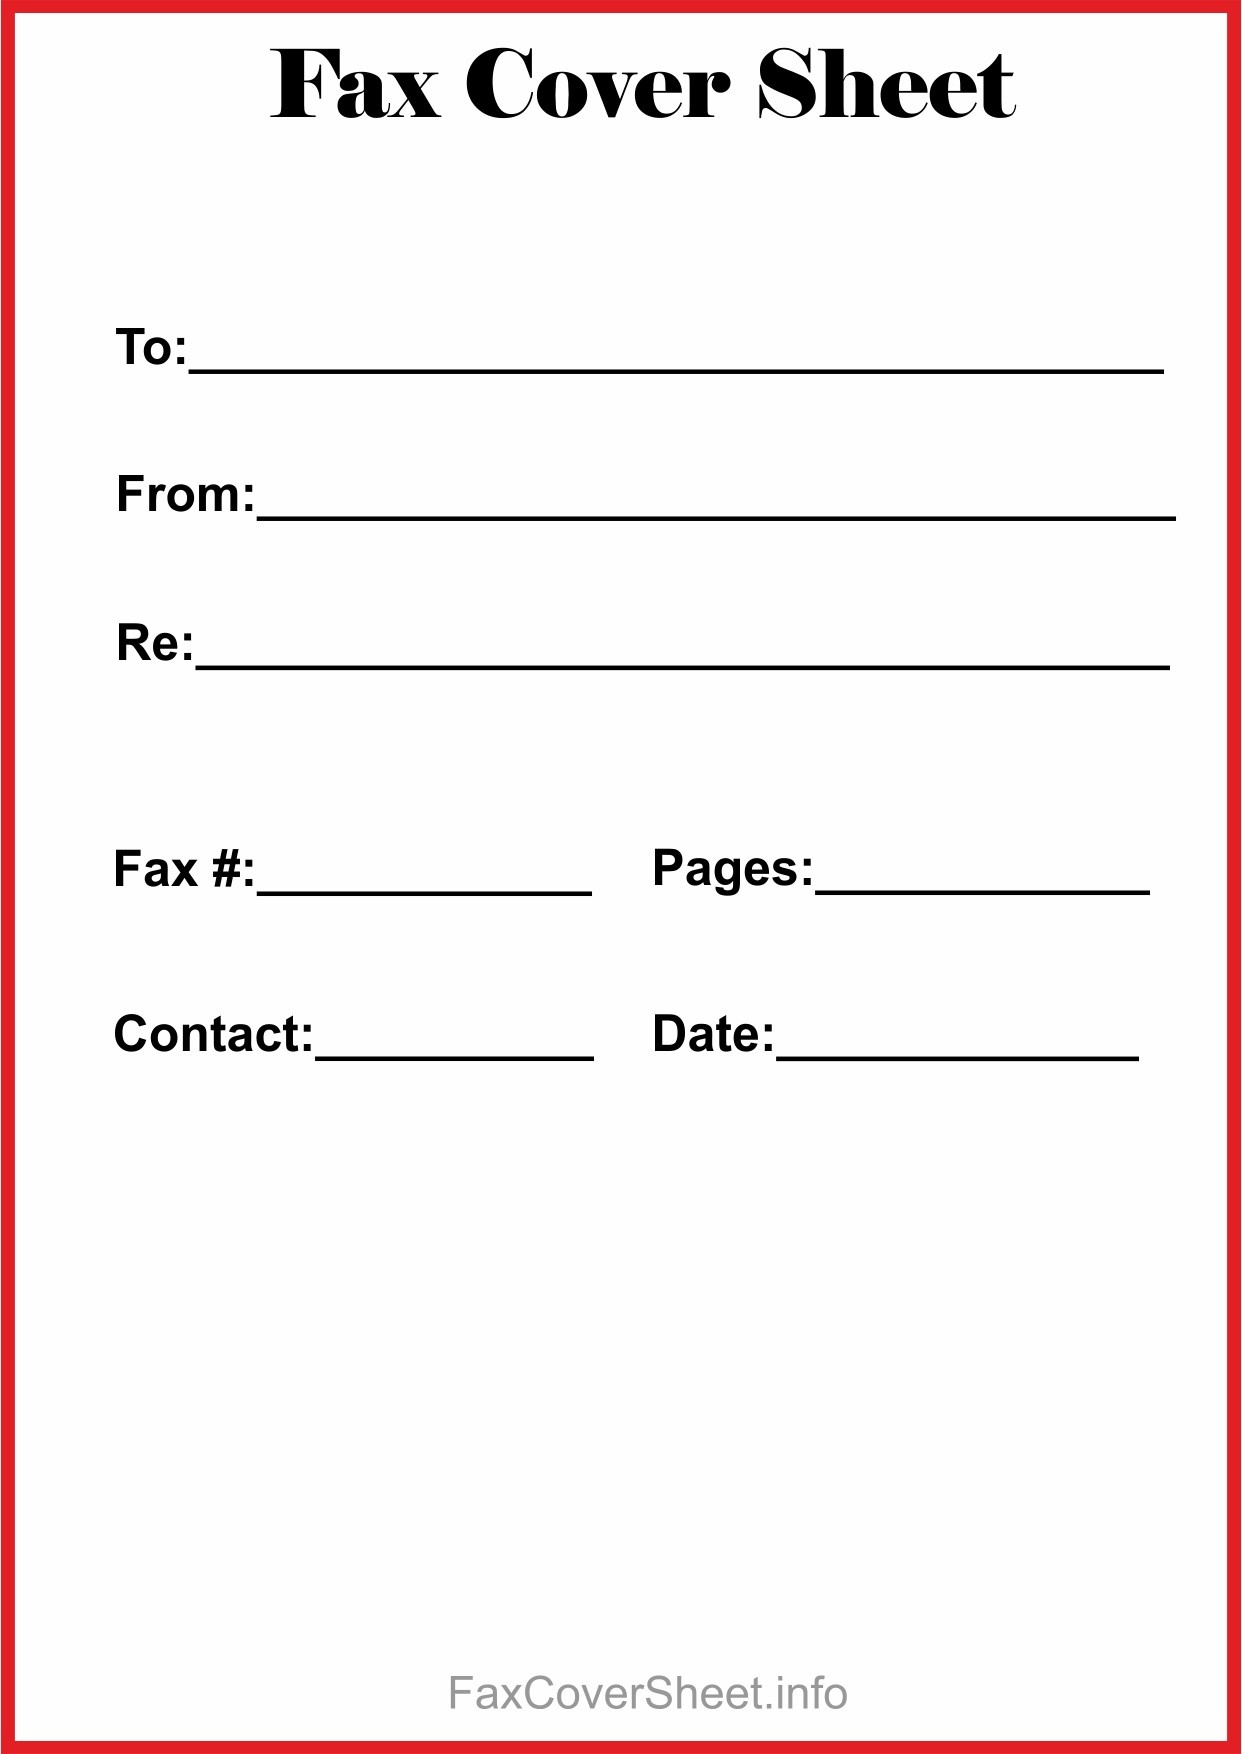 Fax Cover Sheet Fillable New Free Fax Cover Sheet Template - Free Printable Fax Cover Page